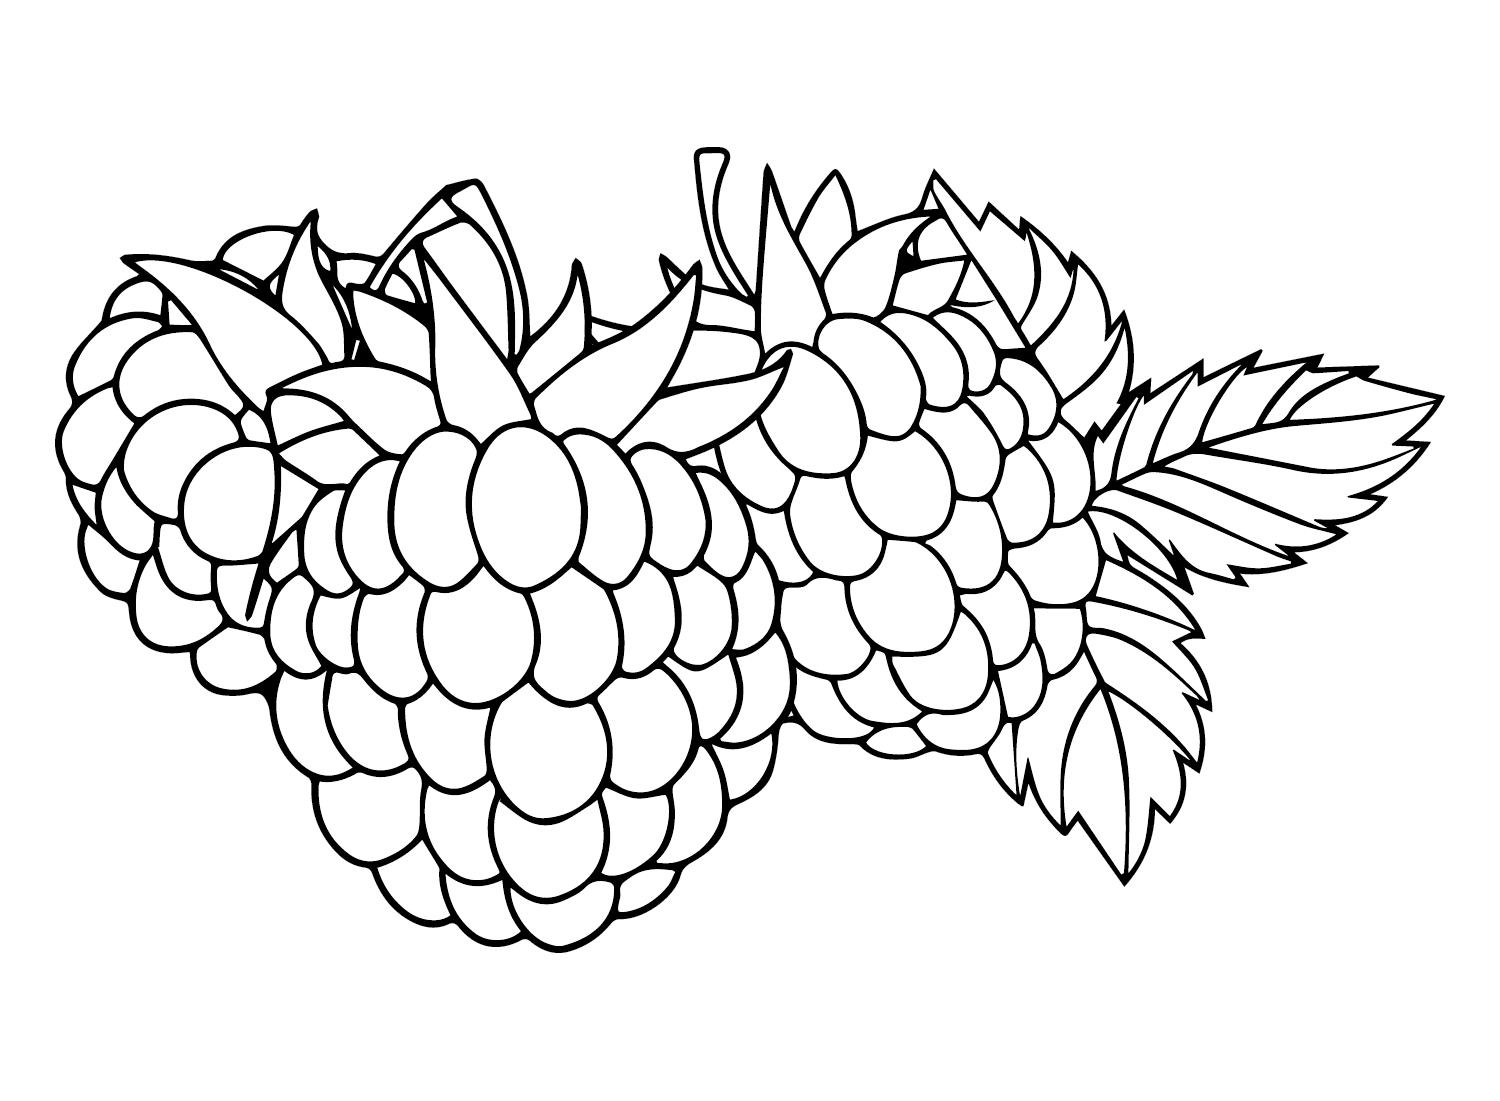 raspberries coloring pages